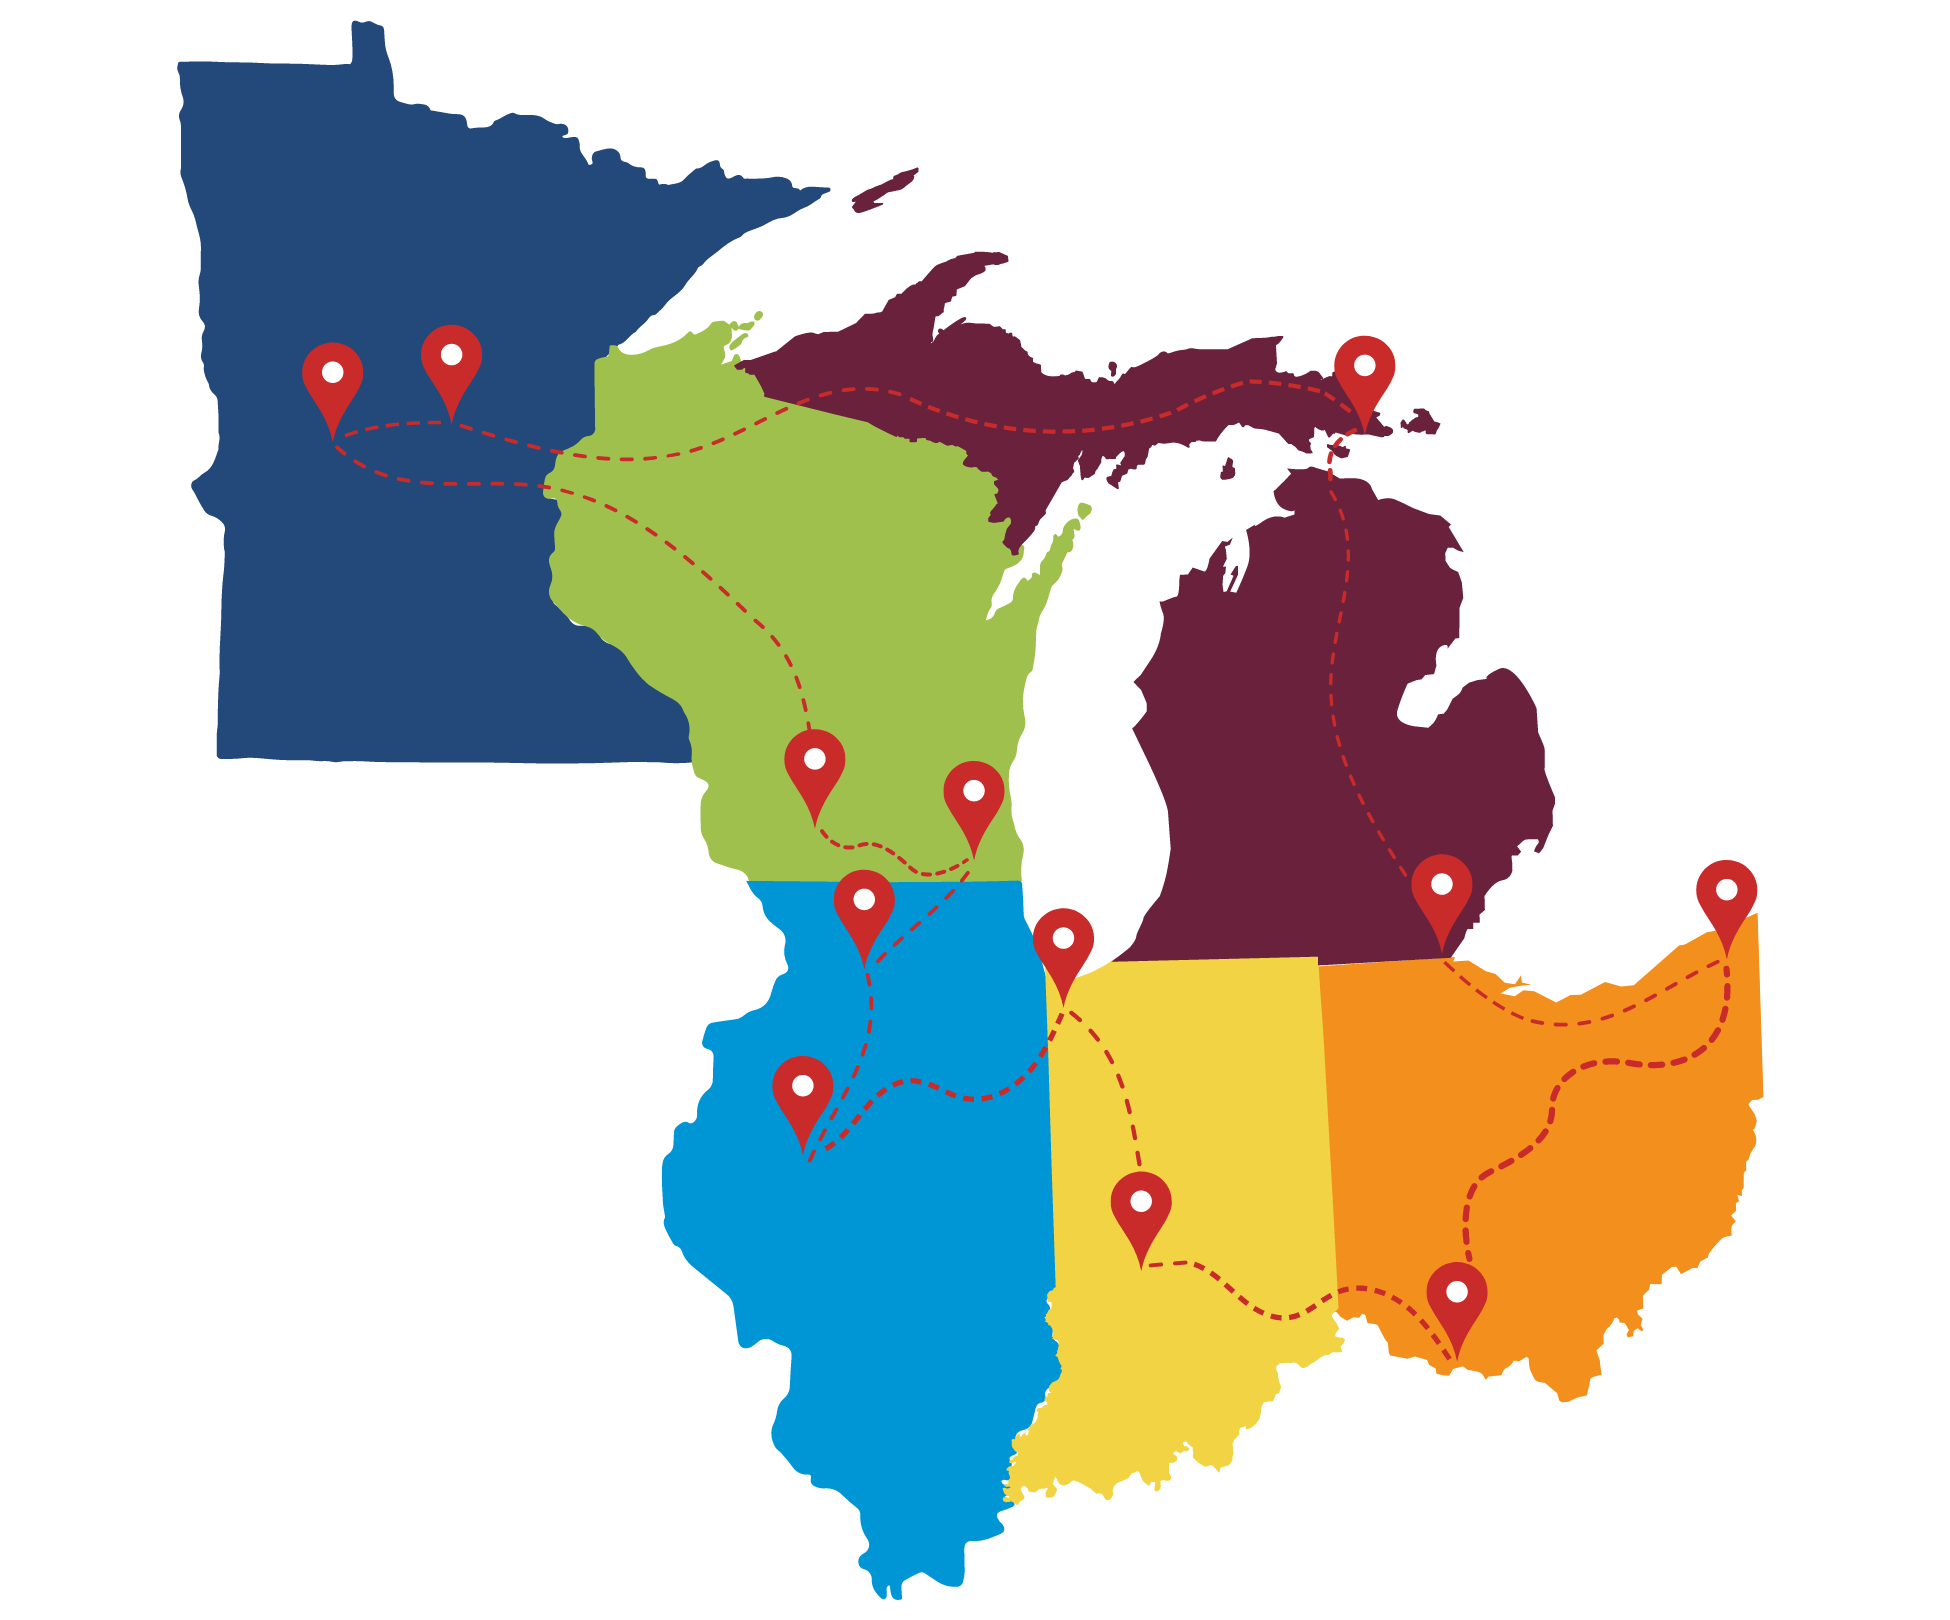 A color-coded map showing a route through Minnesota, Wisconsin, Illinois, Indiana, Ohio, and Michigan.